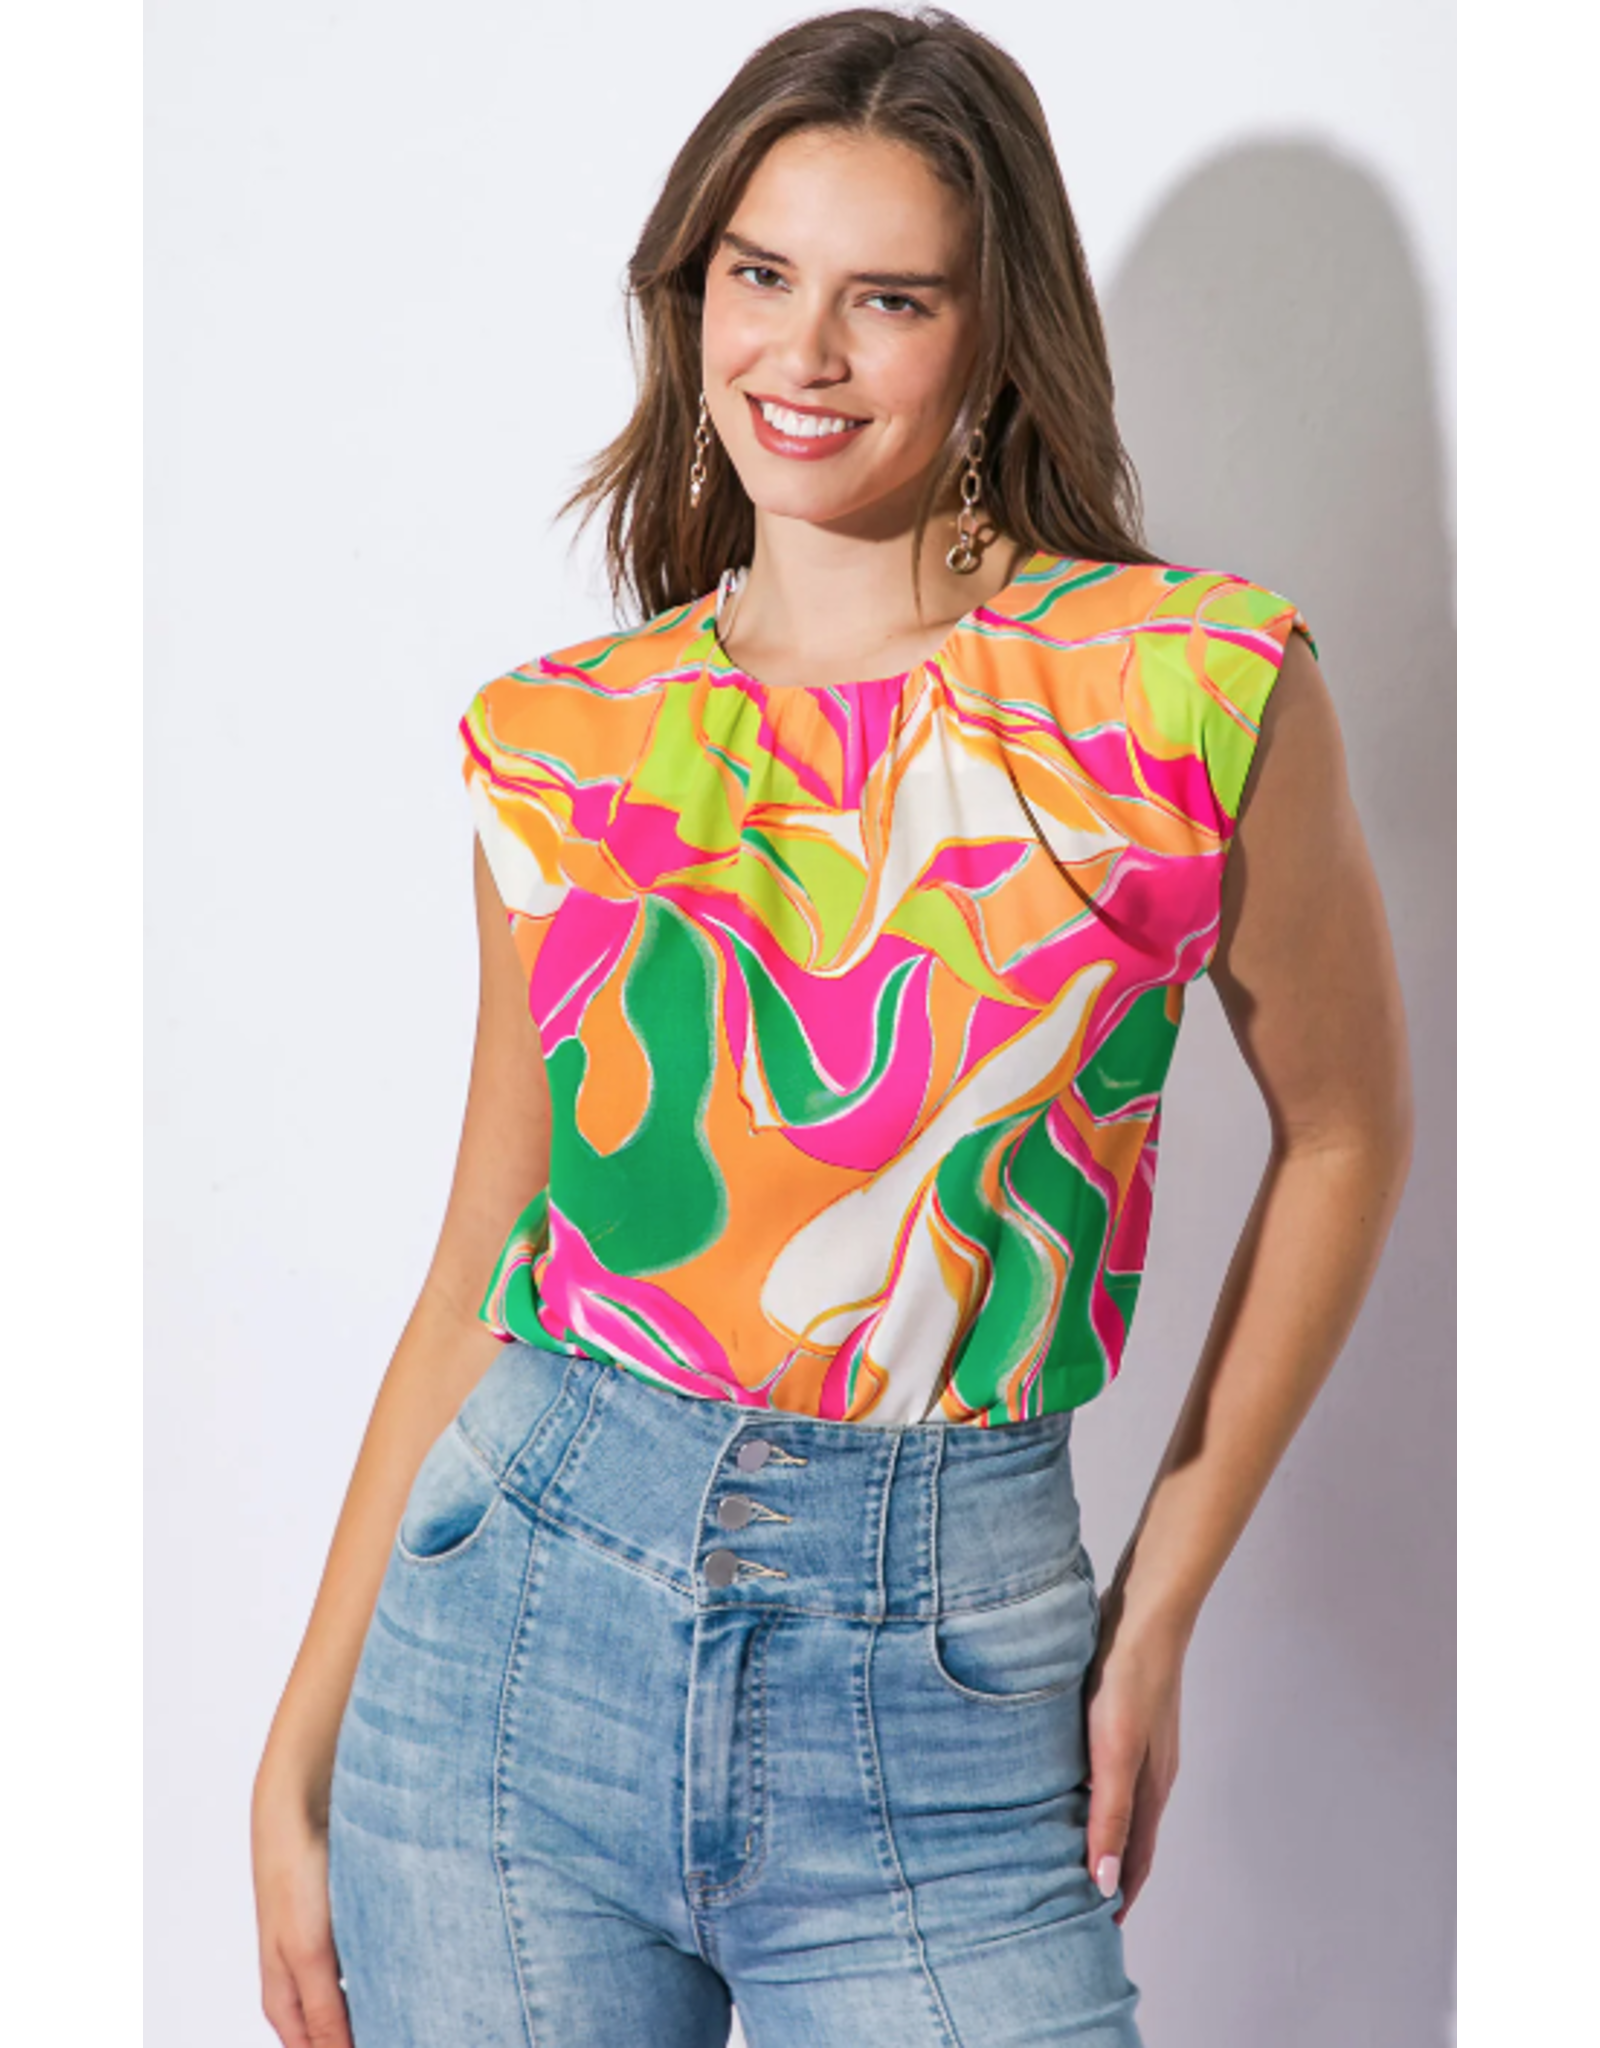 AMALTHEA ABSTRACT SLVLSS TOP